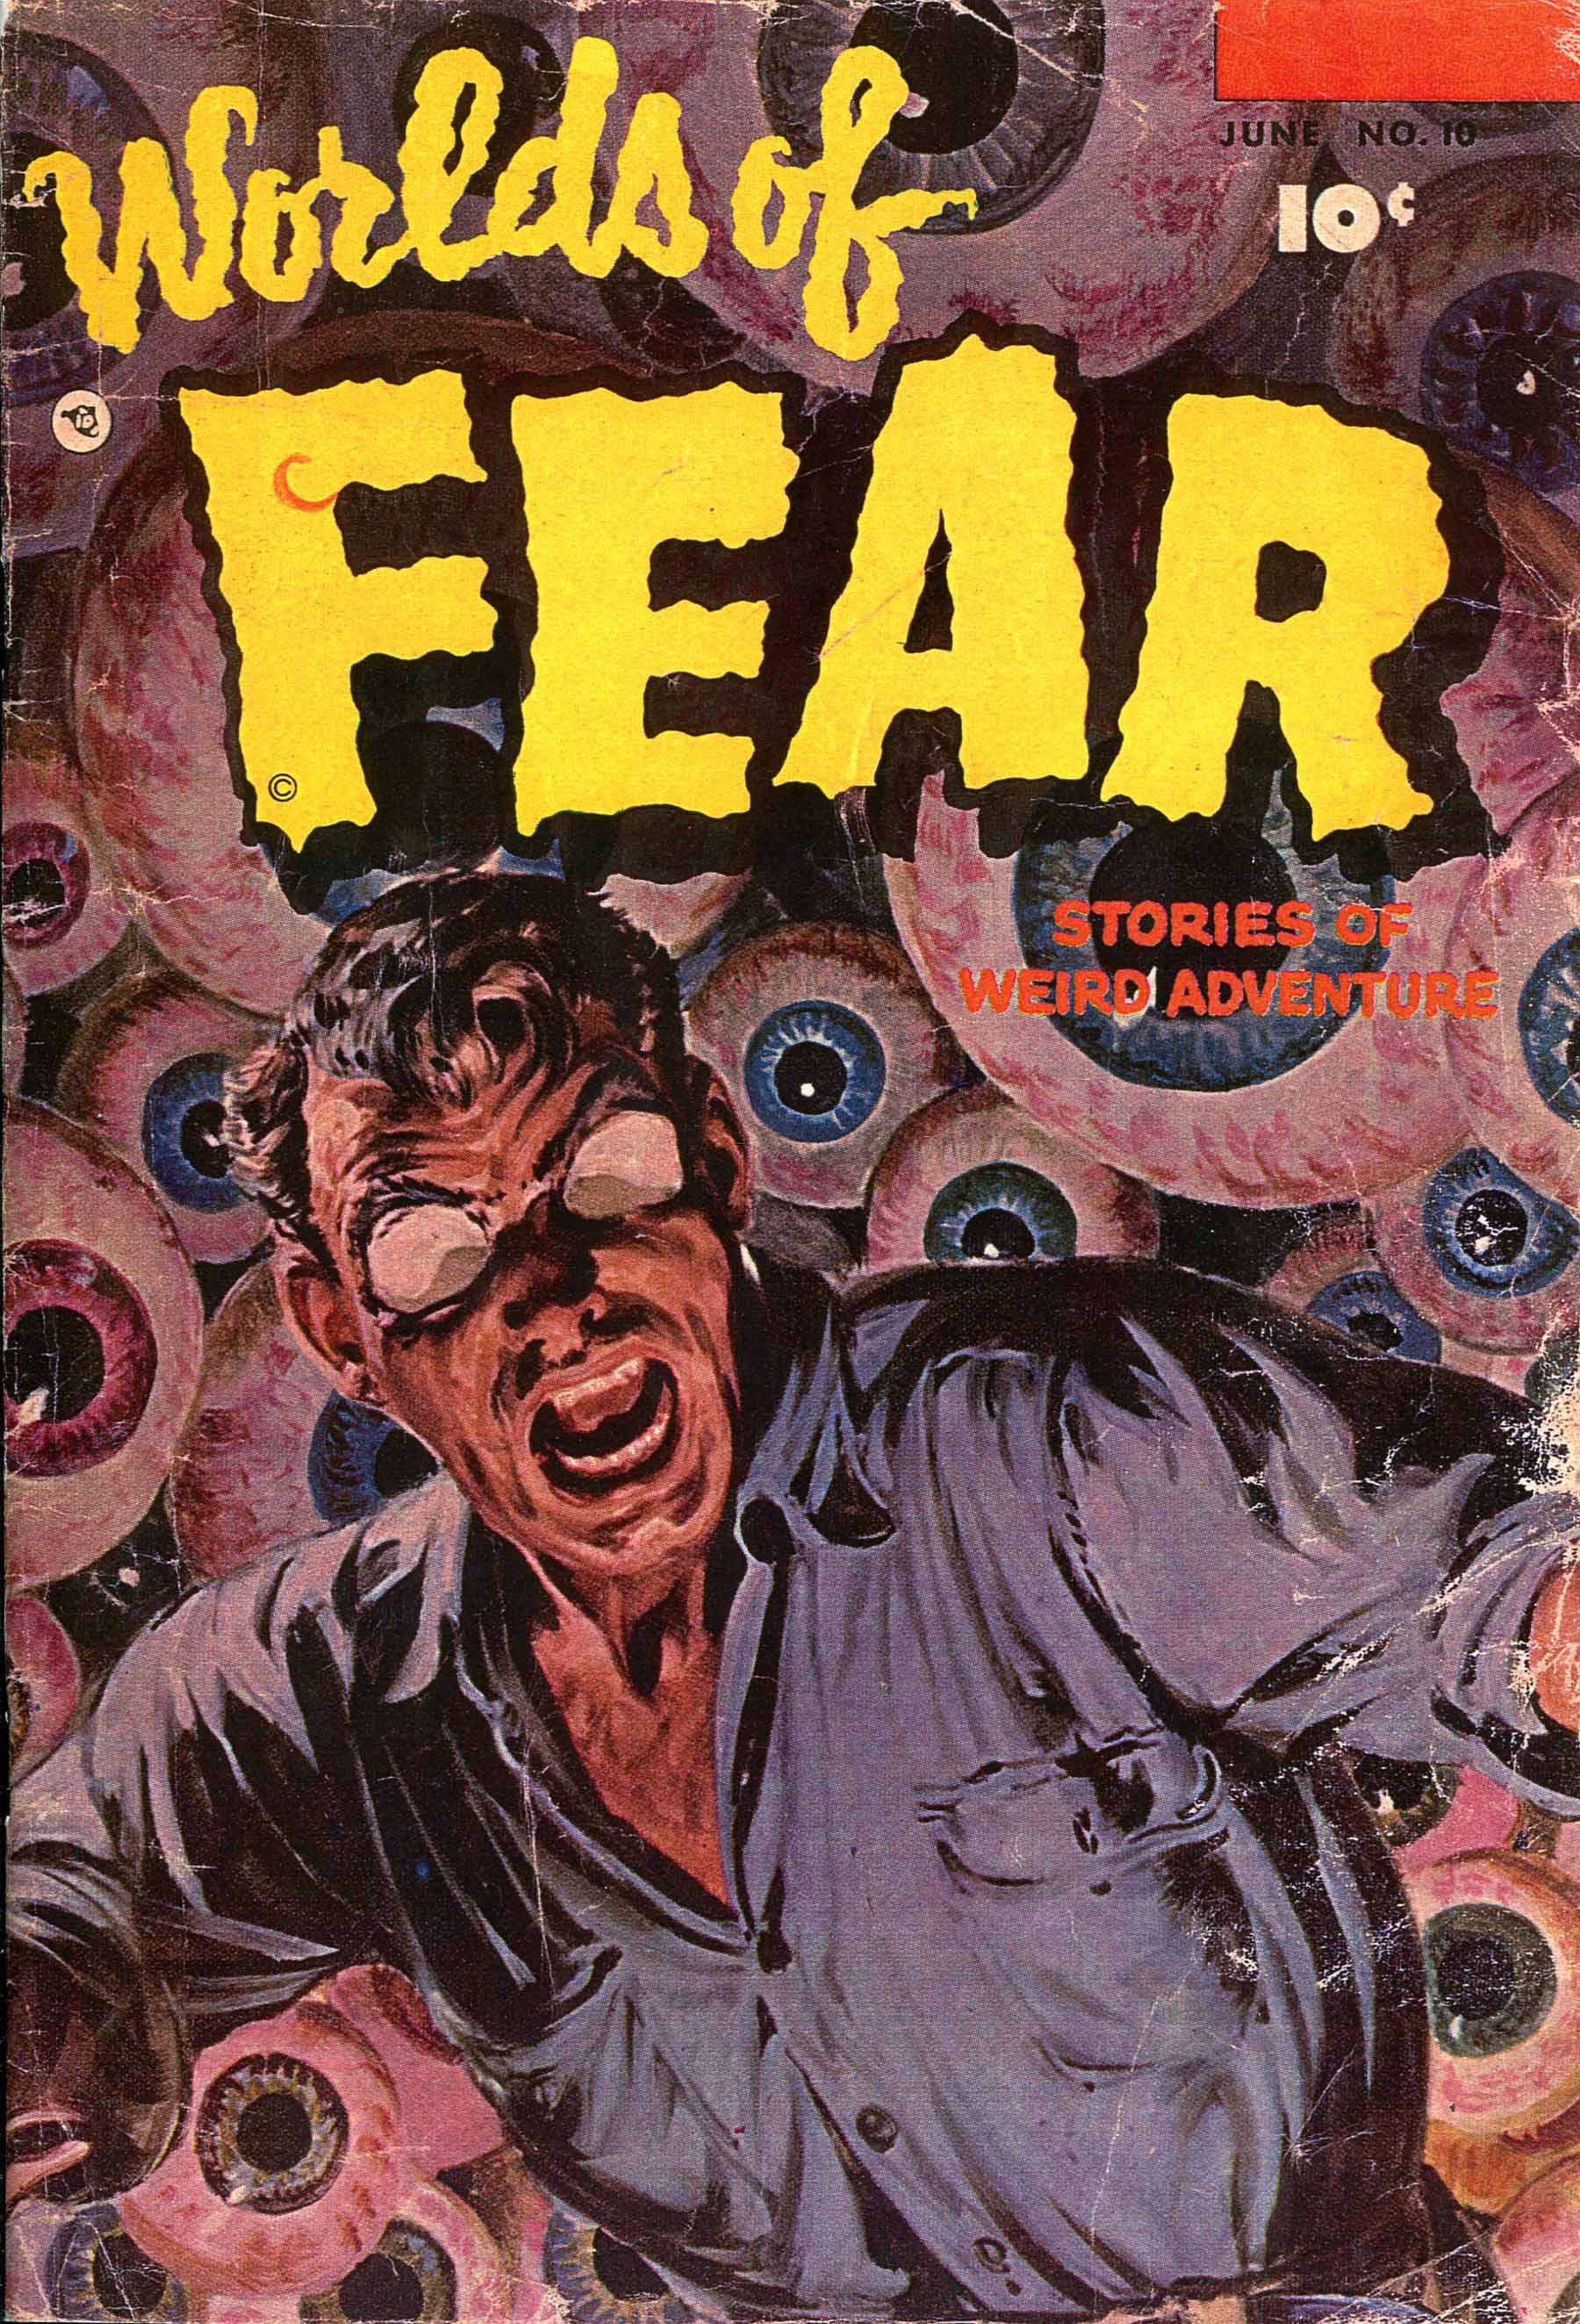 Read online Worlds of Fear comic -  Issue #10 - 1